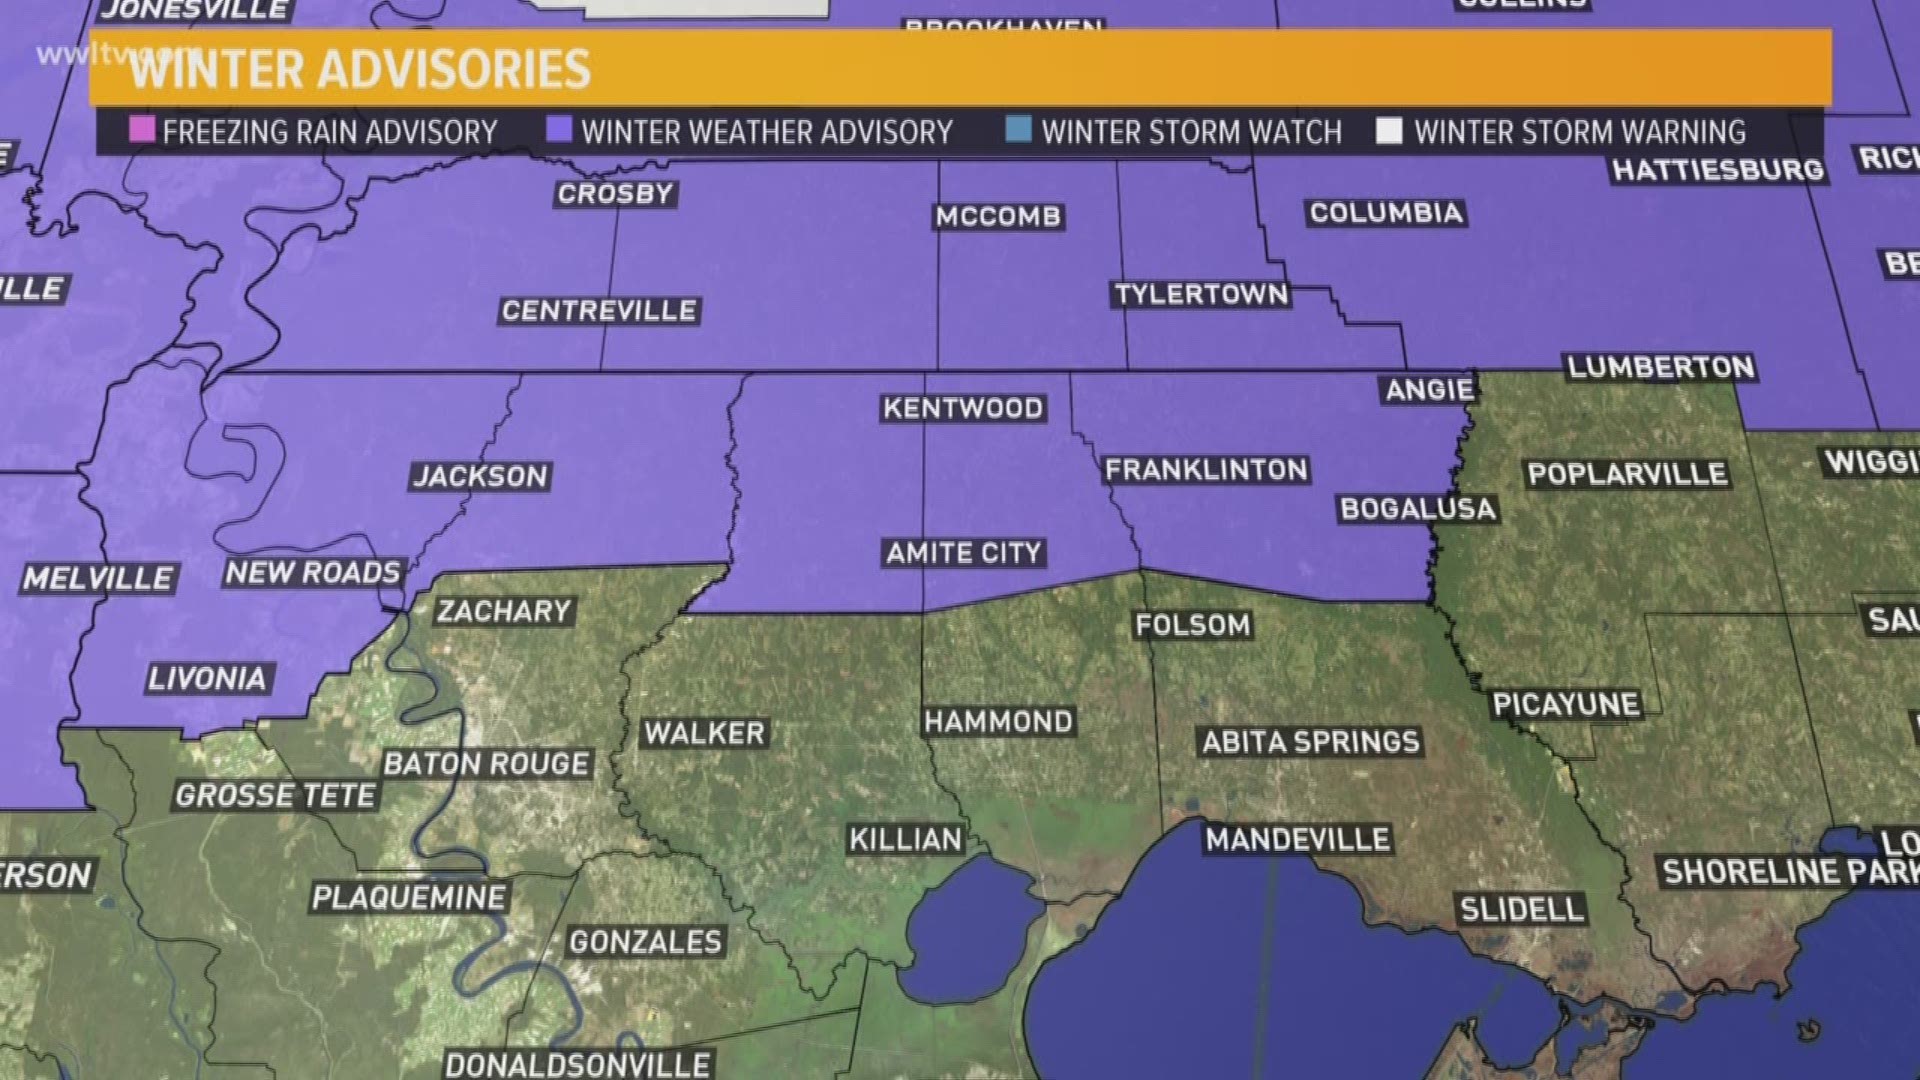 Visit WWLTV.com for an updated list of school closures ahead of Tuesday's winter weather advisory.